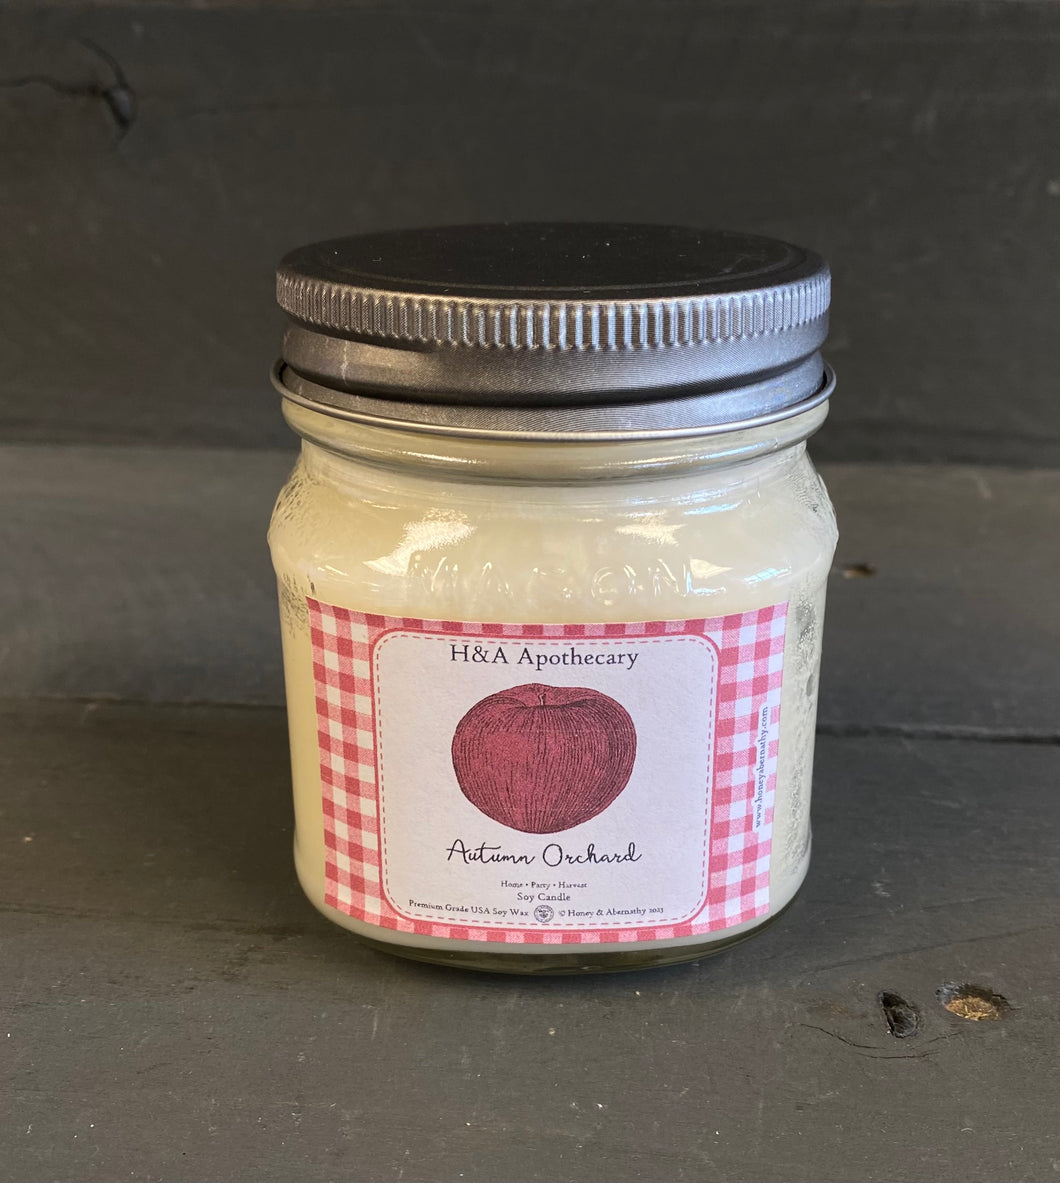 H&A Apothecary Autumn Orchard Soy Candle